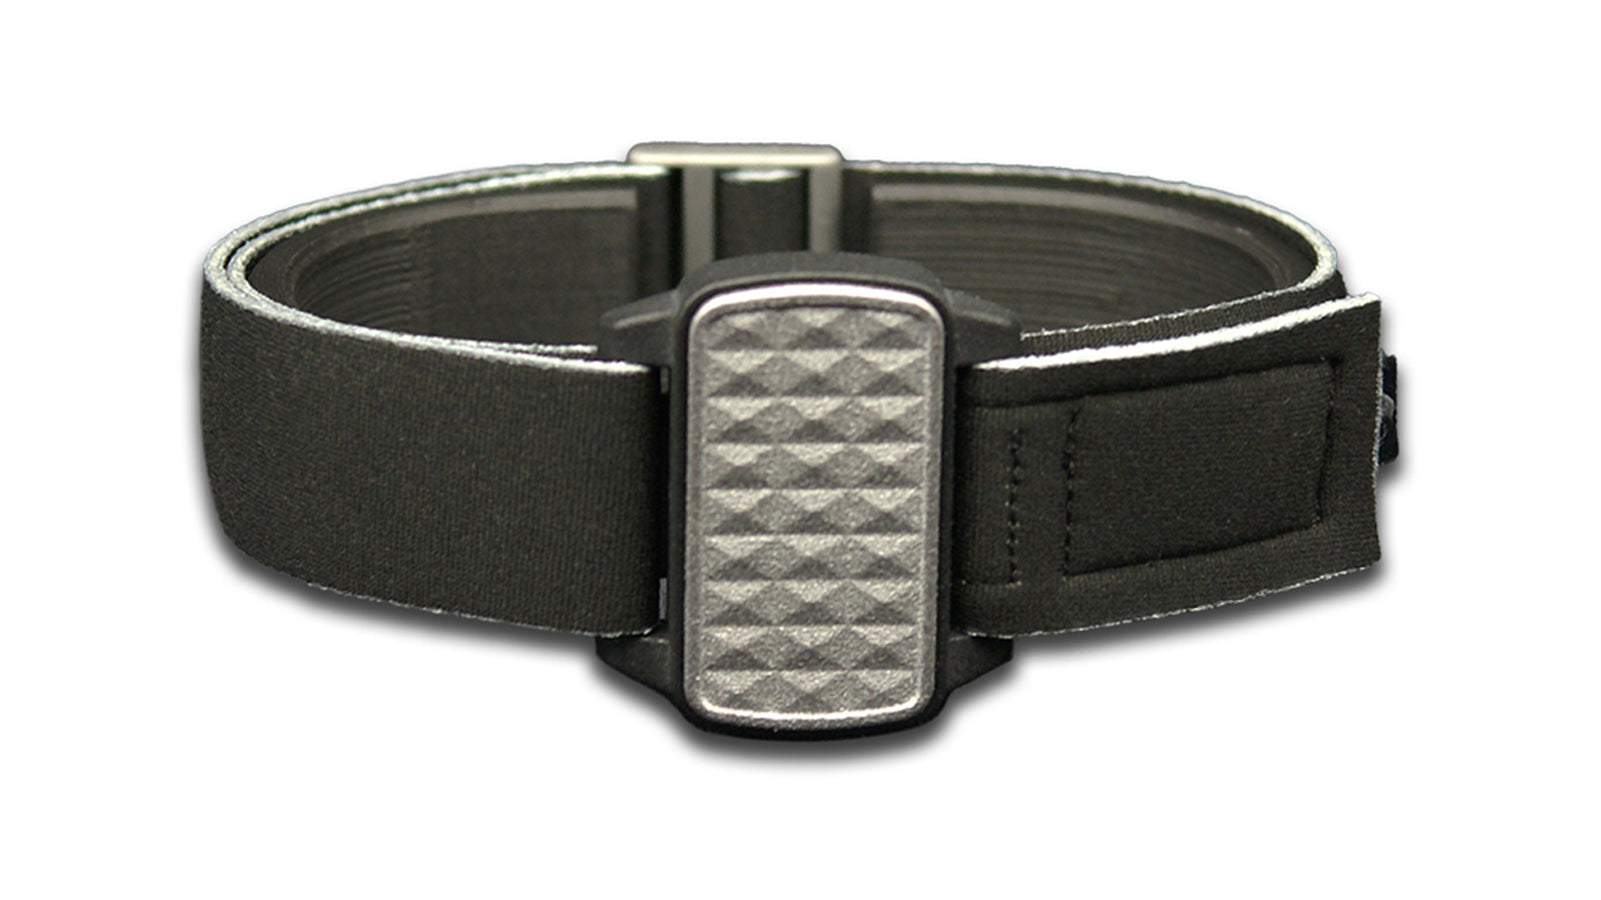 Dexband armband in pewter with pyramids cover. Black strap edged in coordinating pewter.